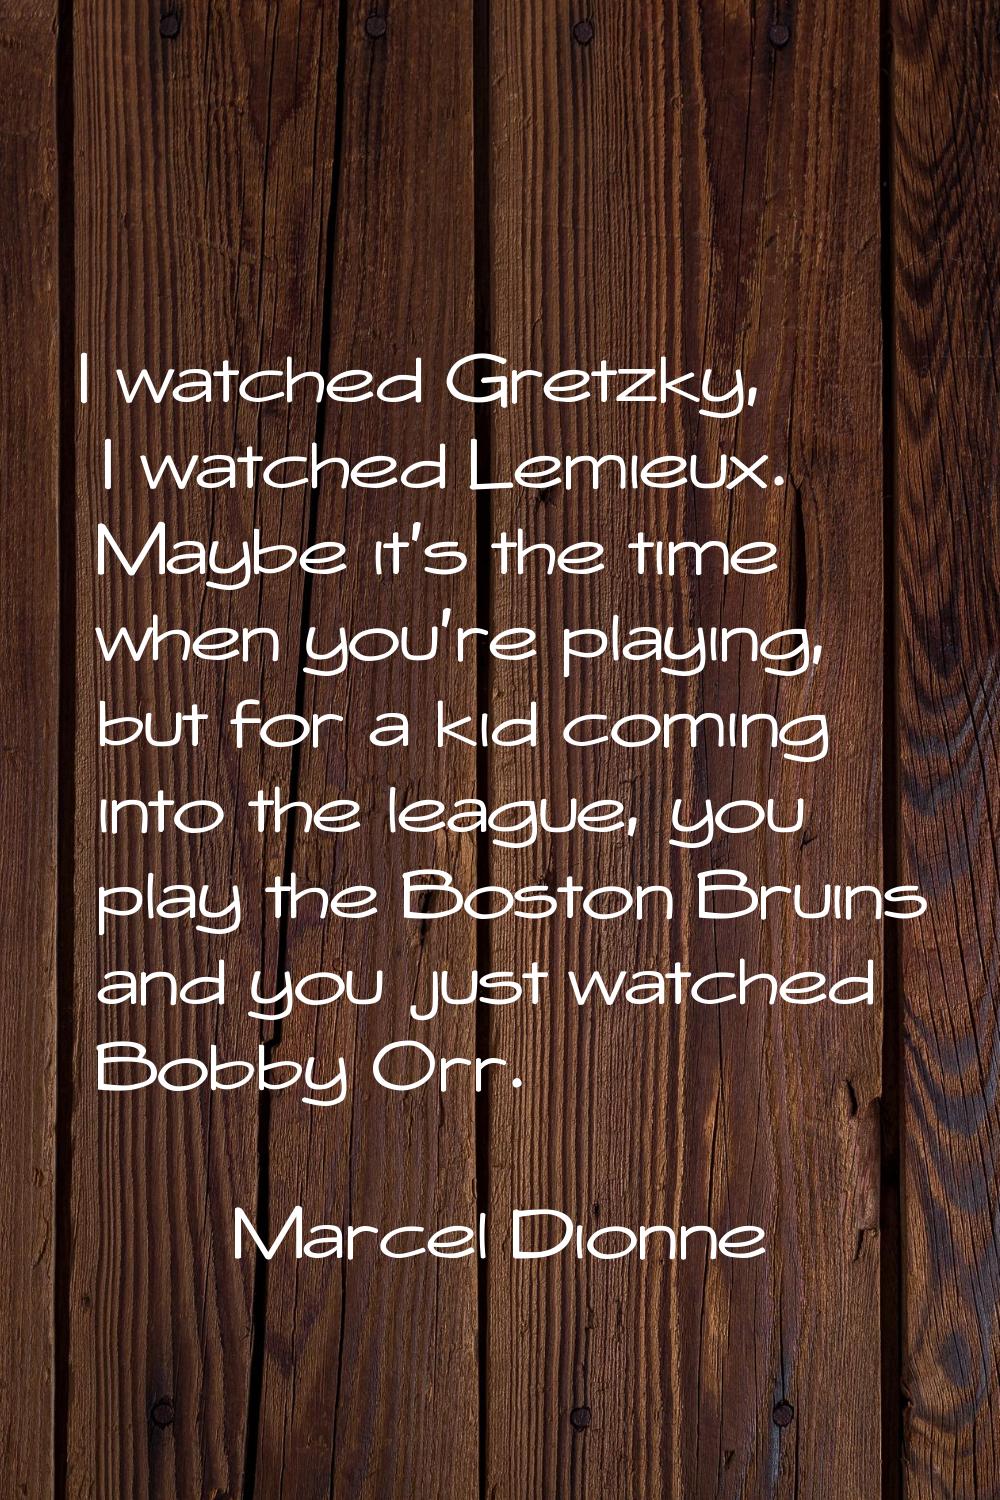 I watched Gretzky, I watched Lemieux. Maybe it's the time when you're playing, but for a kid coming